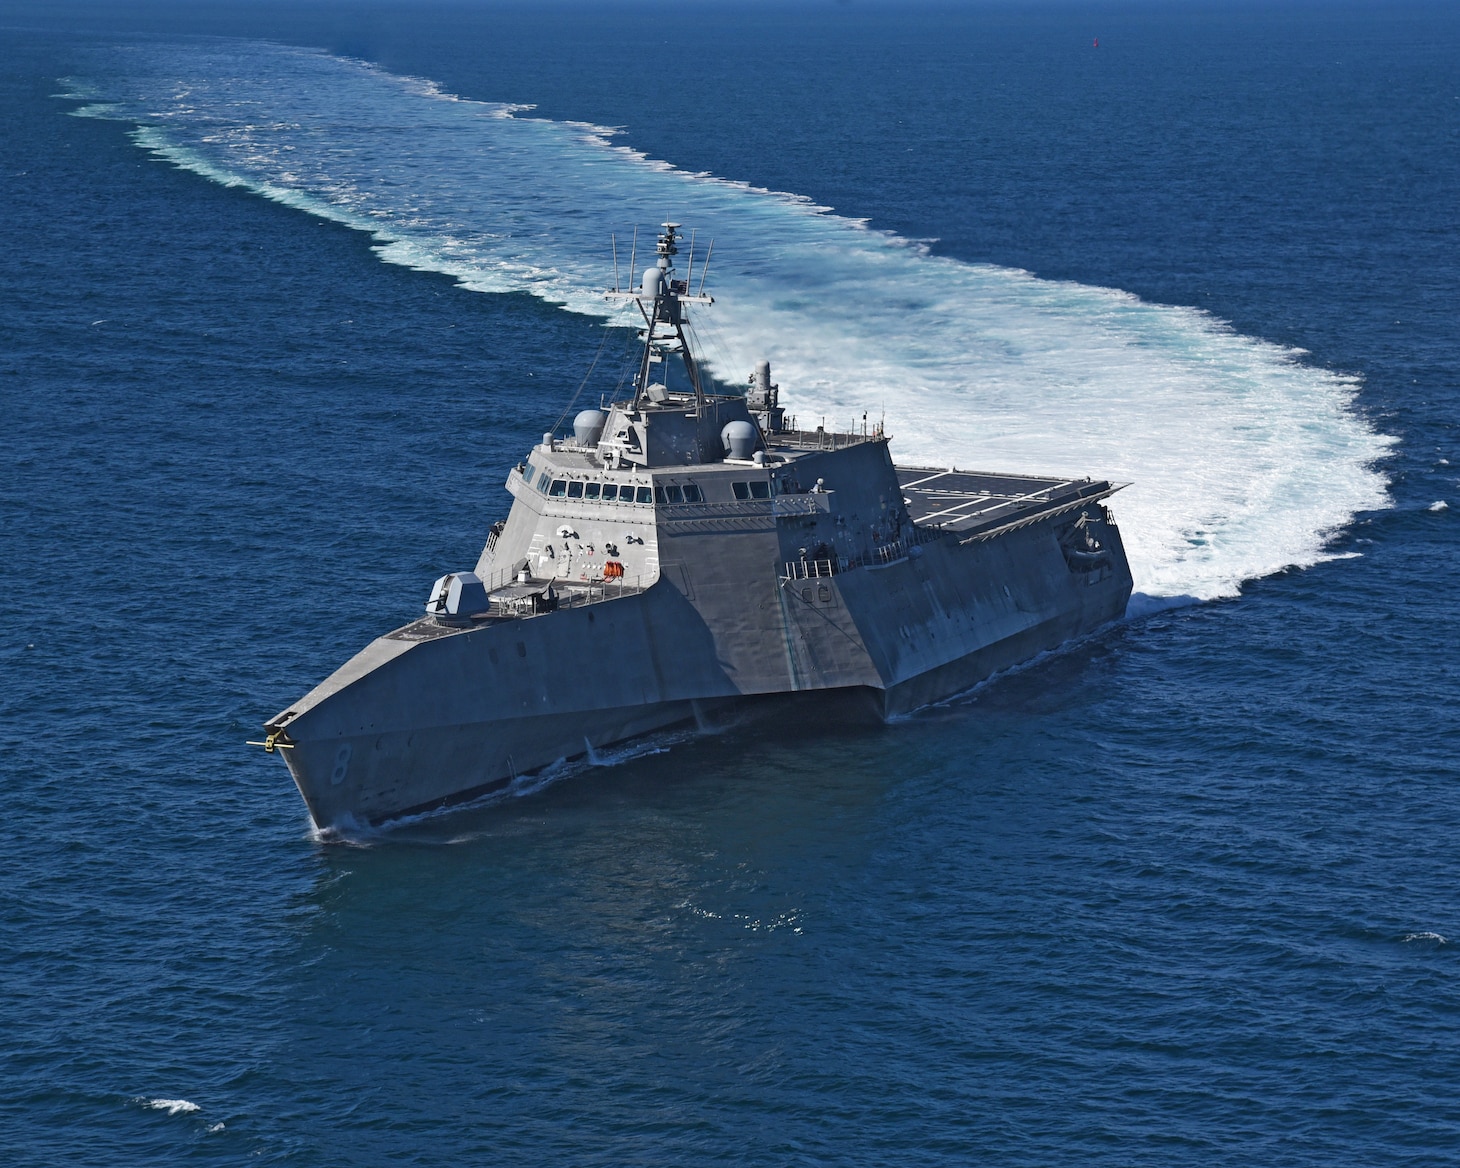 Official U.S. Navy file photo of USS Montgomery (LCS 8).